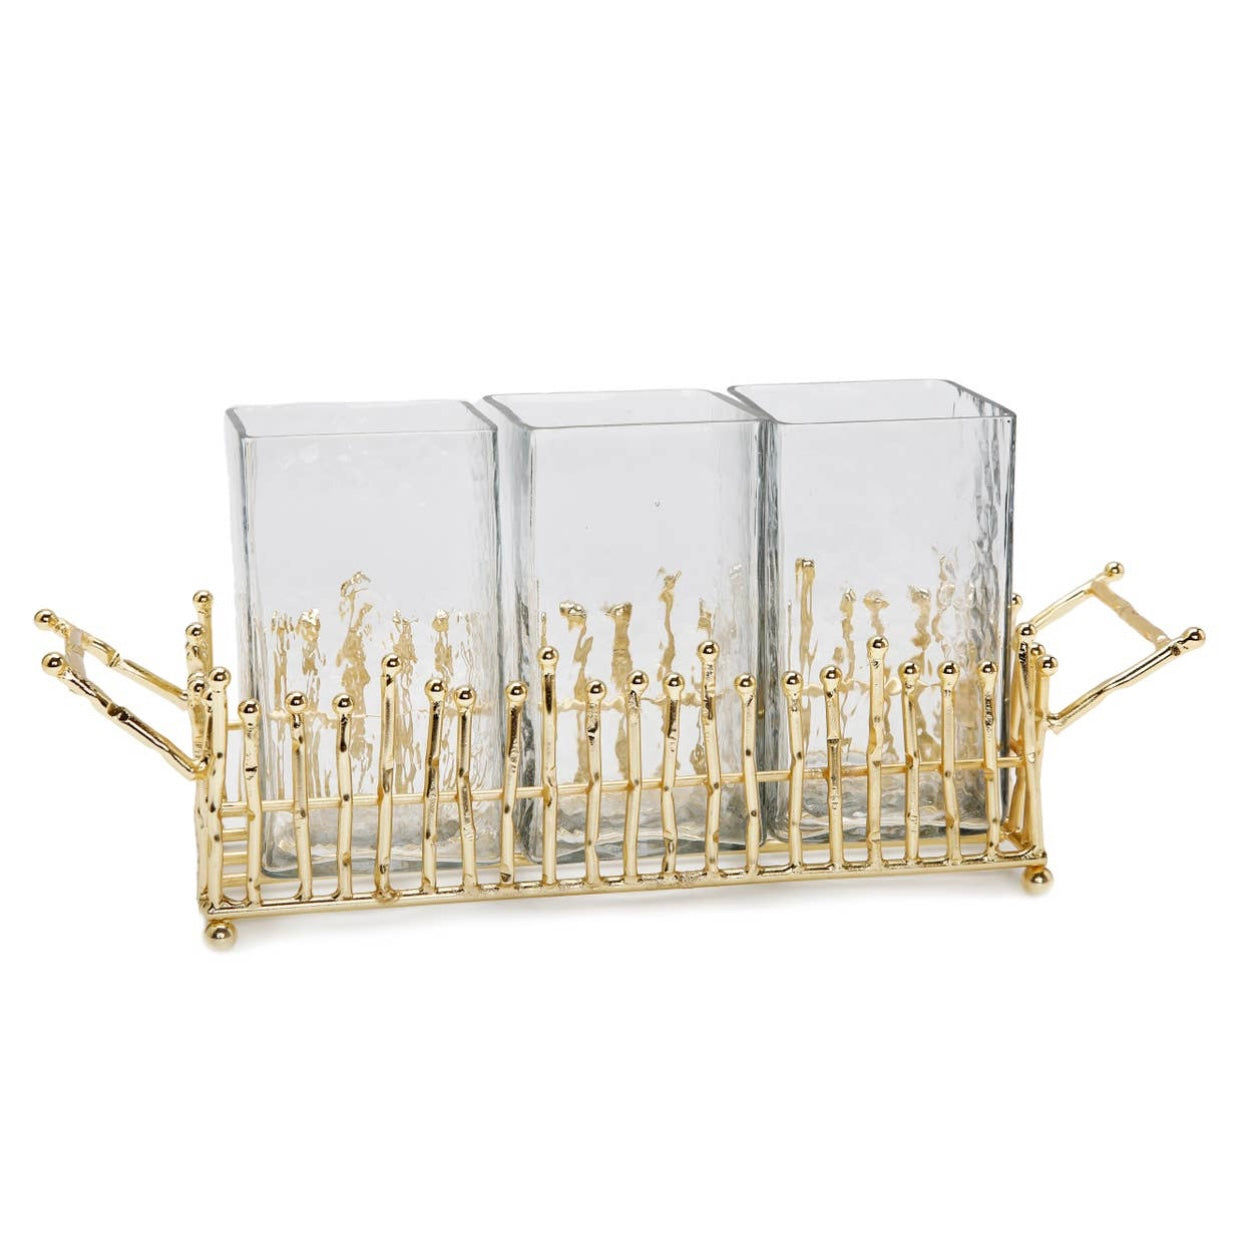 Cutlery Holder With Gold Symmetrical design